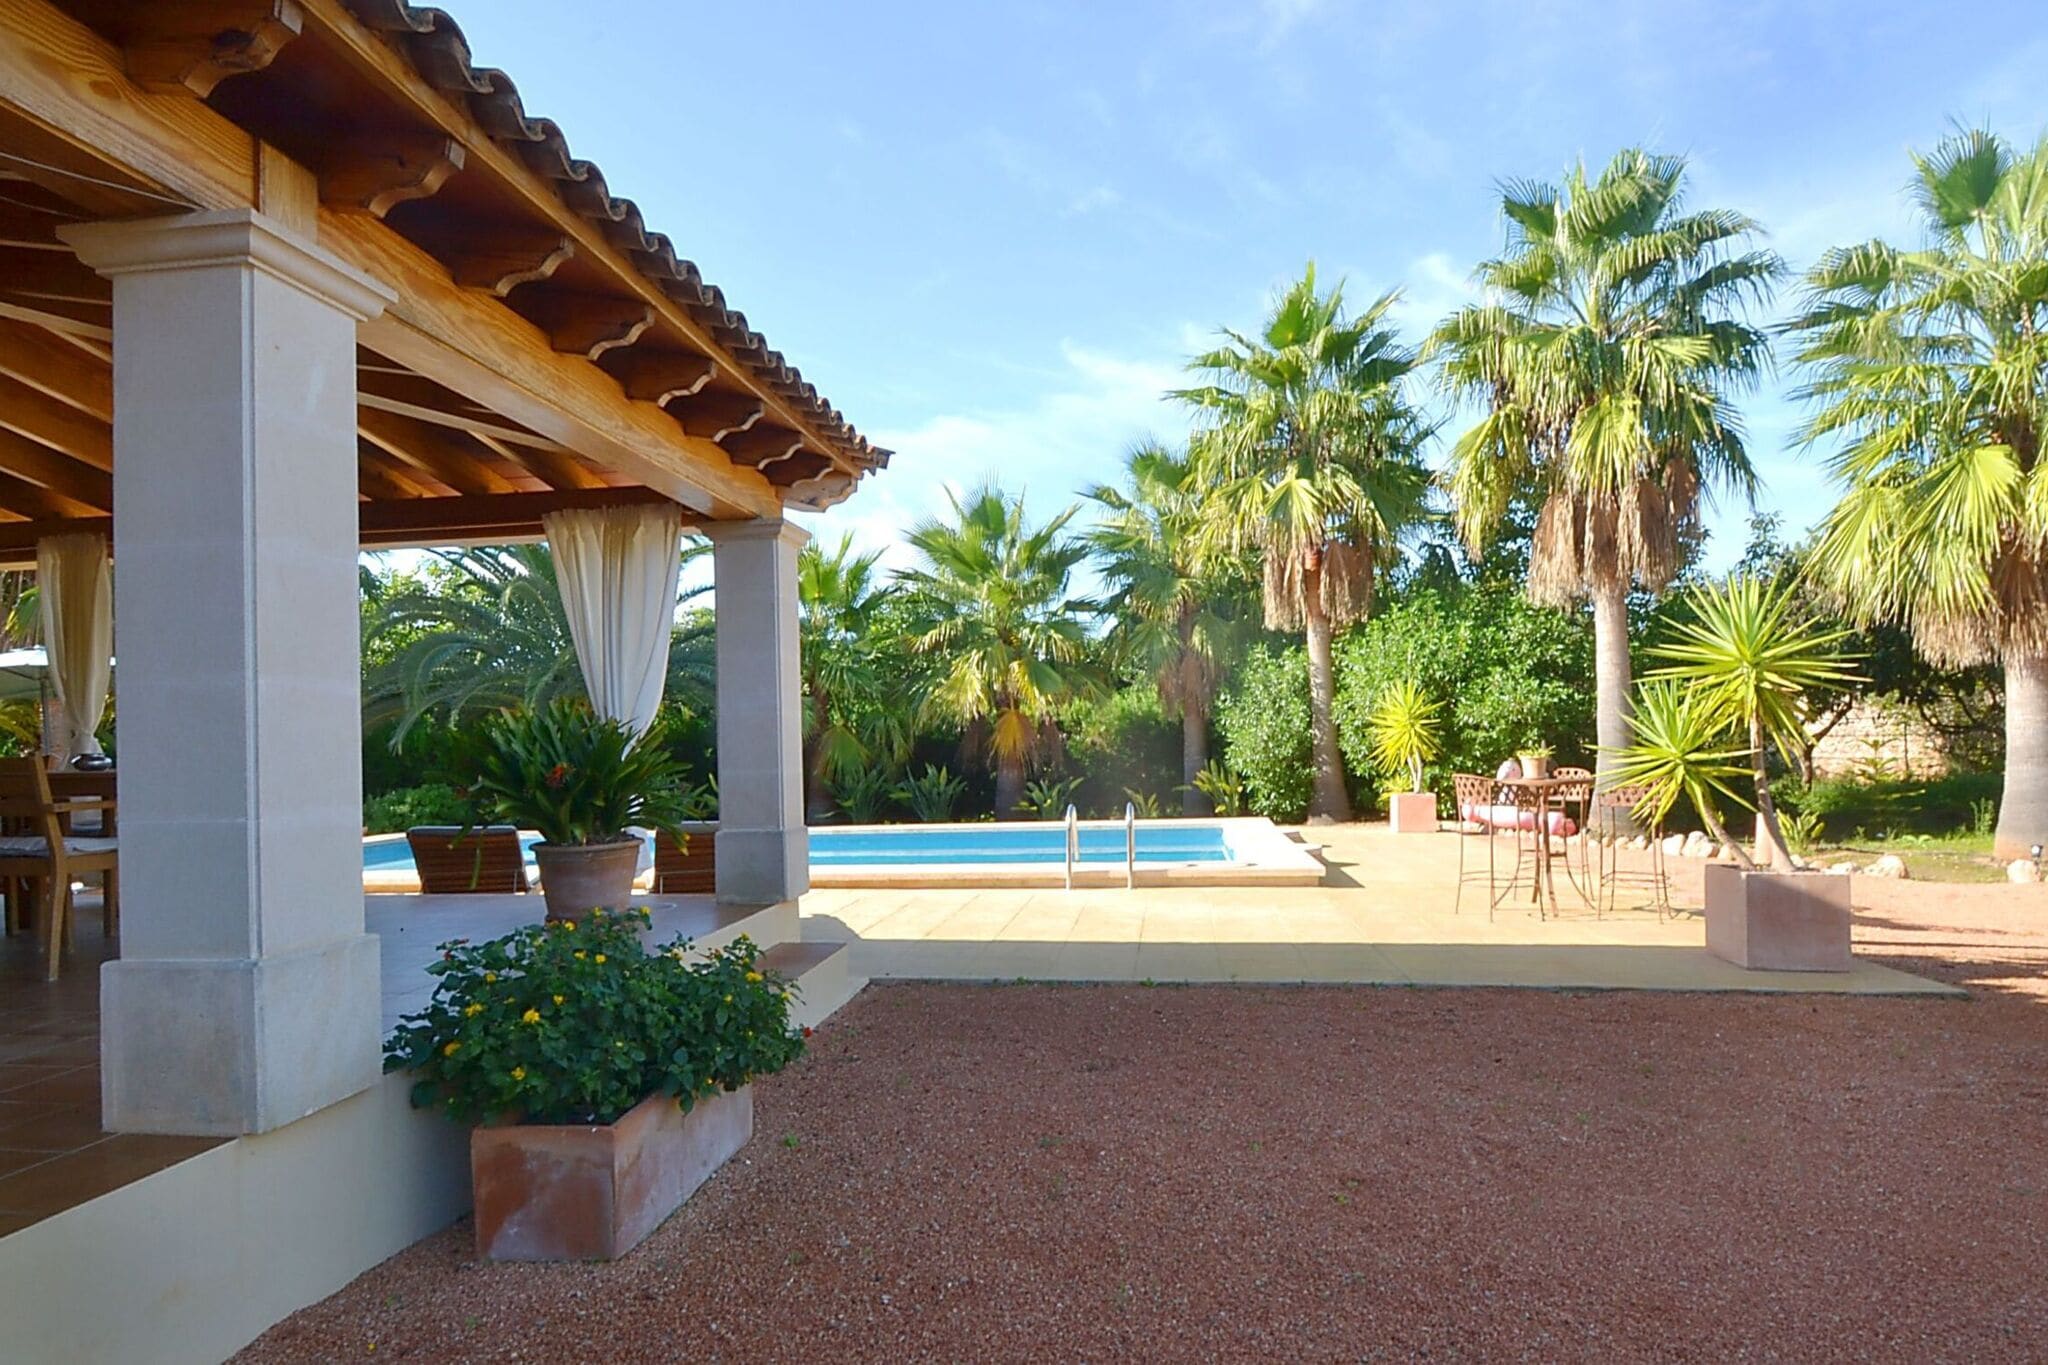 Gorgeous Mansion in Palma de Mallorca with Private Pool